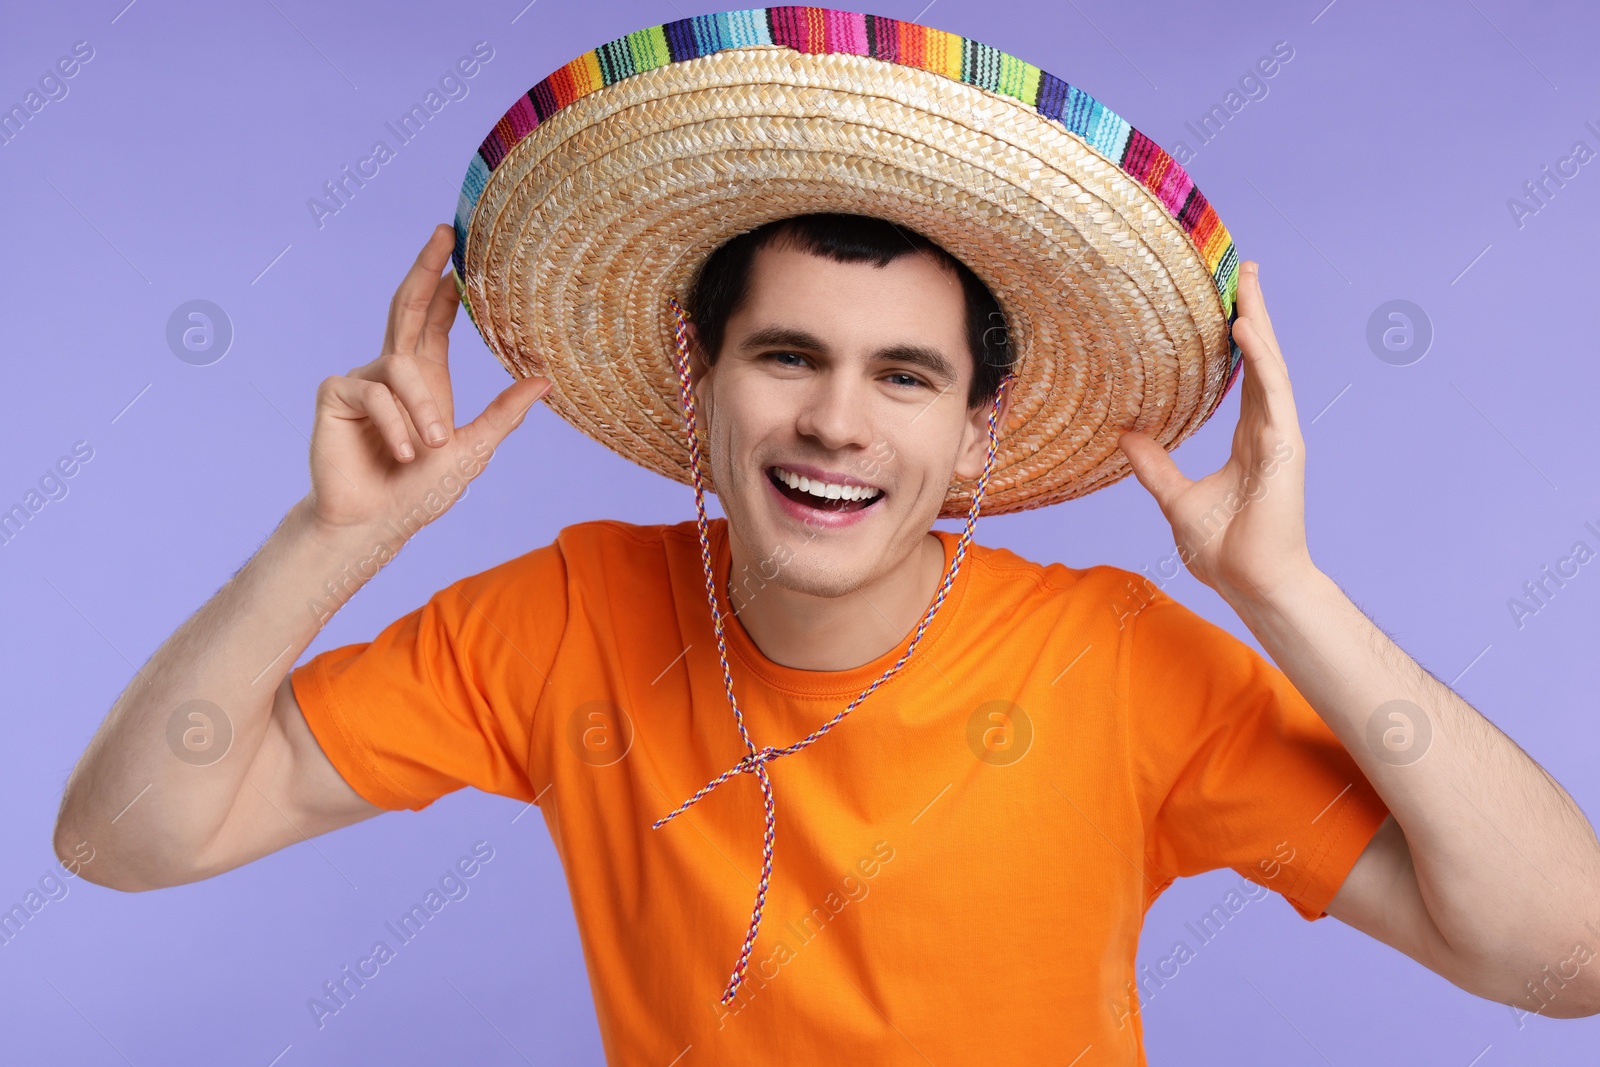 Photo of Young man in Mexican sombrero hat on violet background